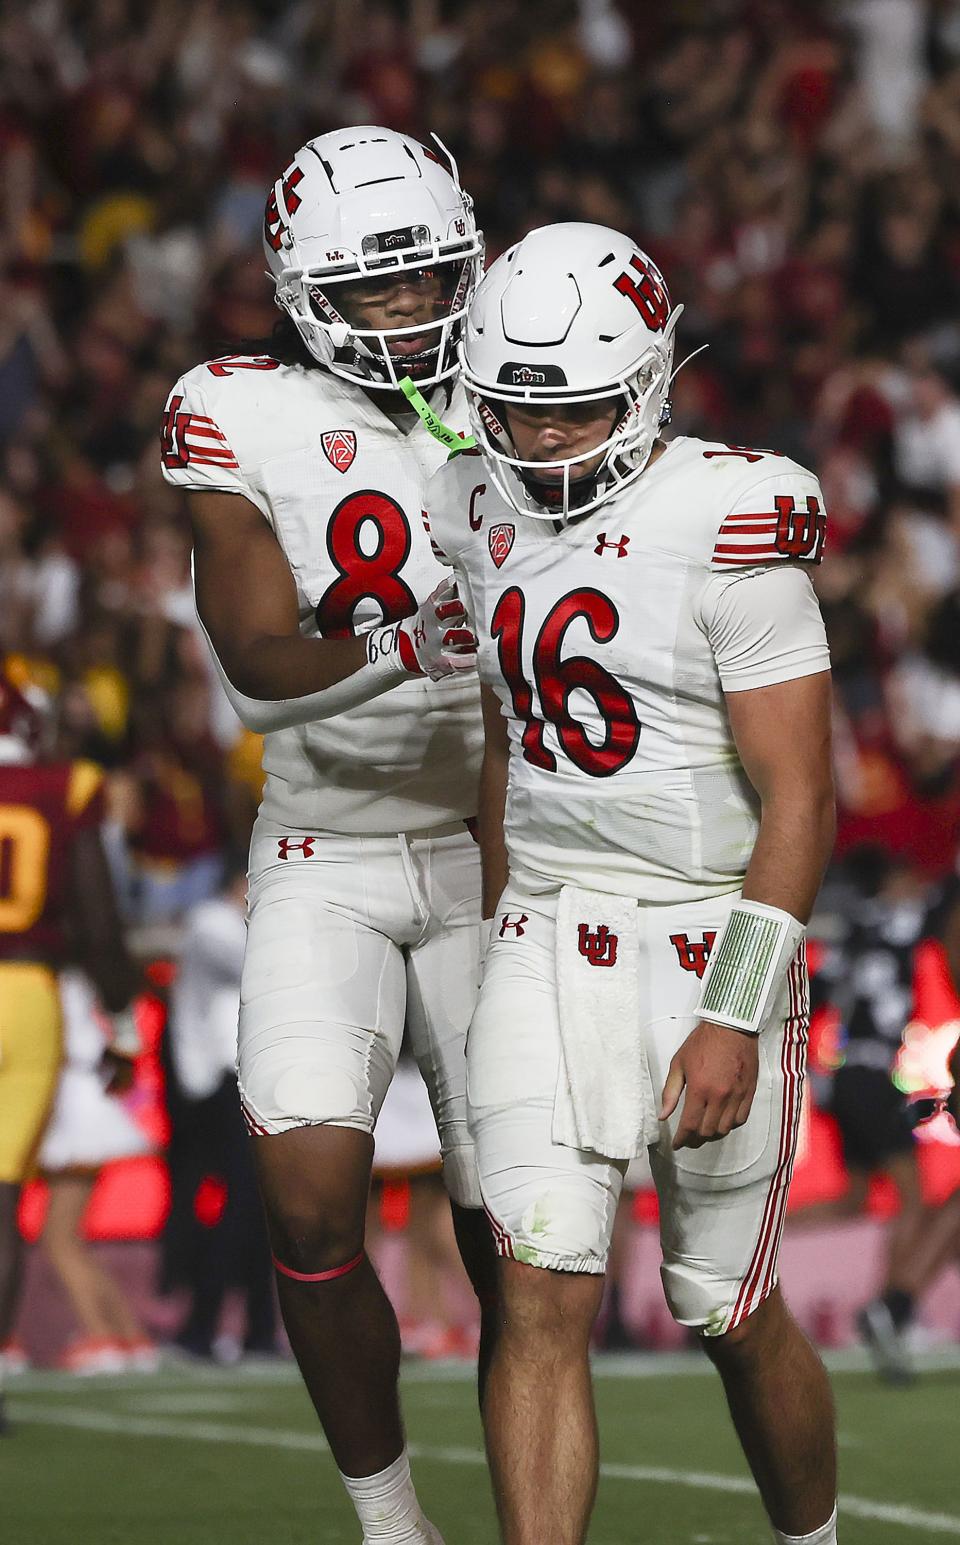 Utah Utes tight end Landen King consoles quarterback Bryson Barnes (16) after Barnes threw an interception in the game against the USC Trojans at the Los Angeles Memorial Coliseum on Saturday, Oct. 21, 2023. | Laura Seitz, Deseret News